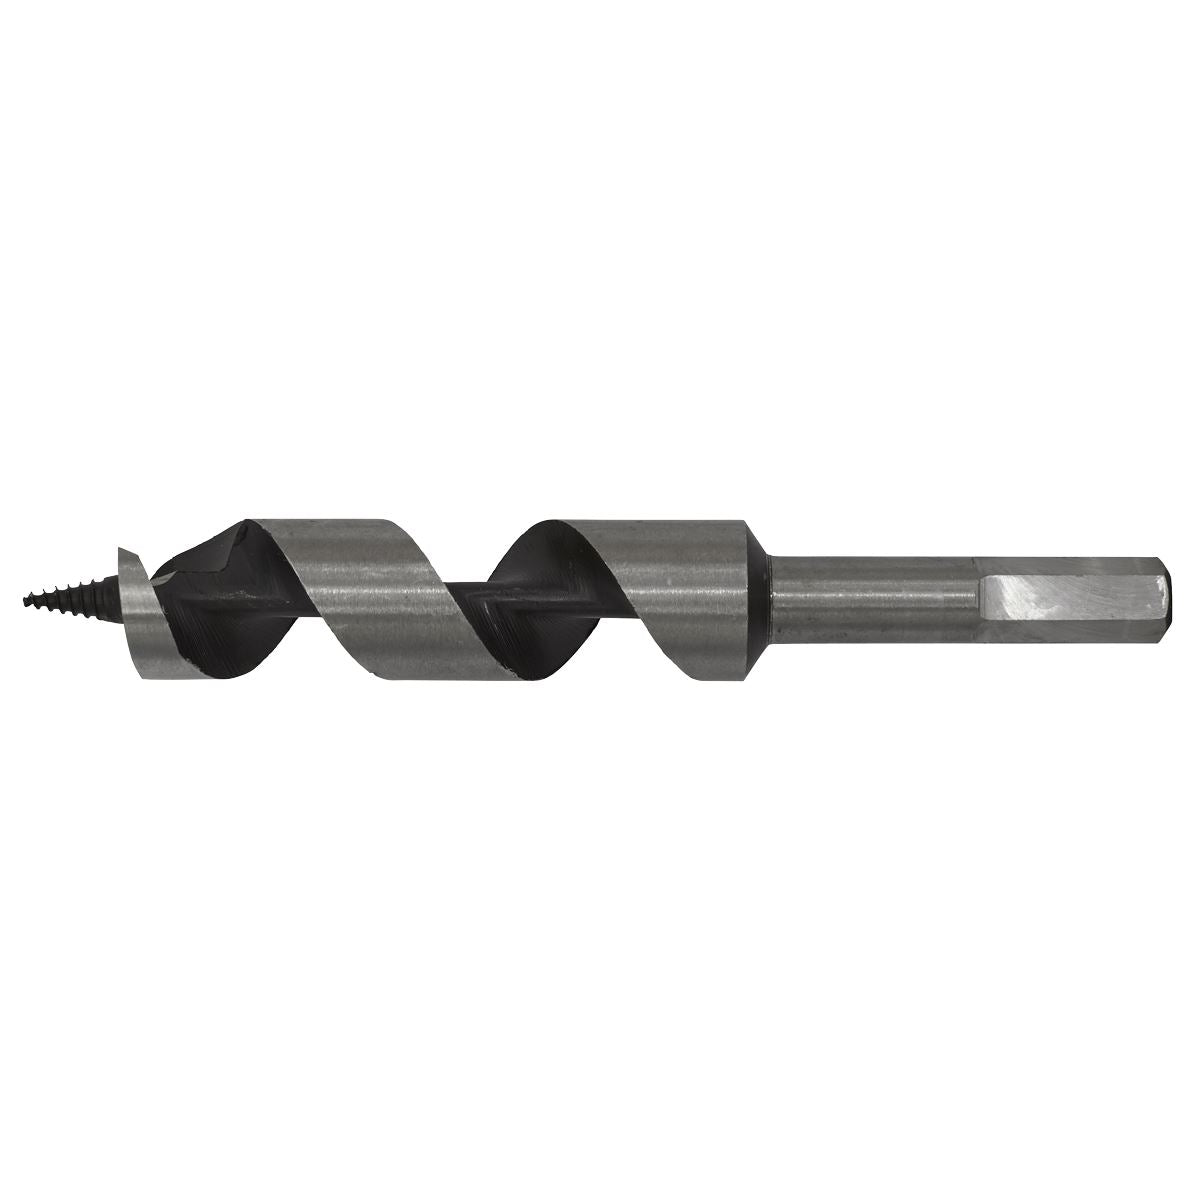 Worksafe by Sealey Auger Wood Drill Bit 22mm x 155mm